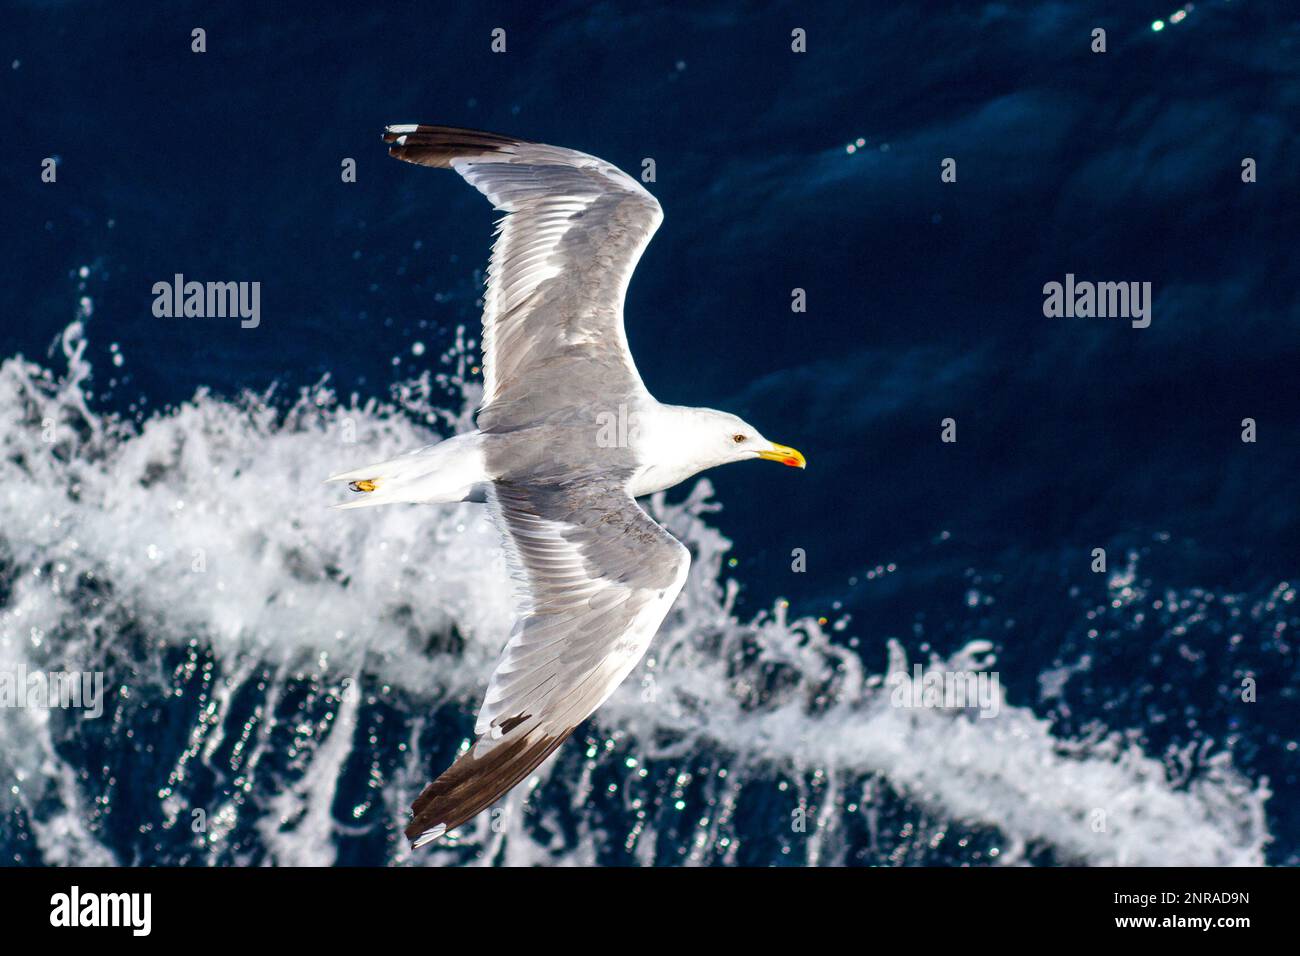 Beautiful seagull soaring in the blue sky Stock Photo